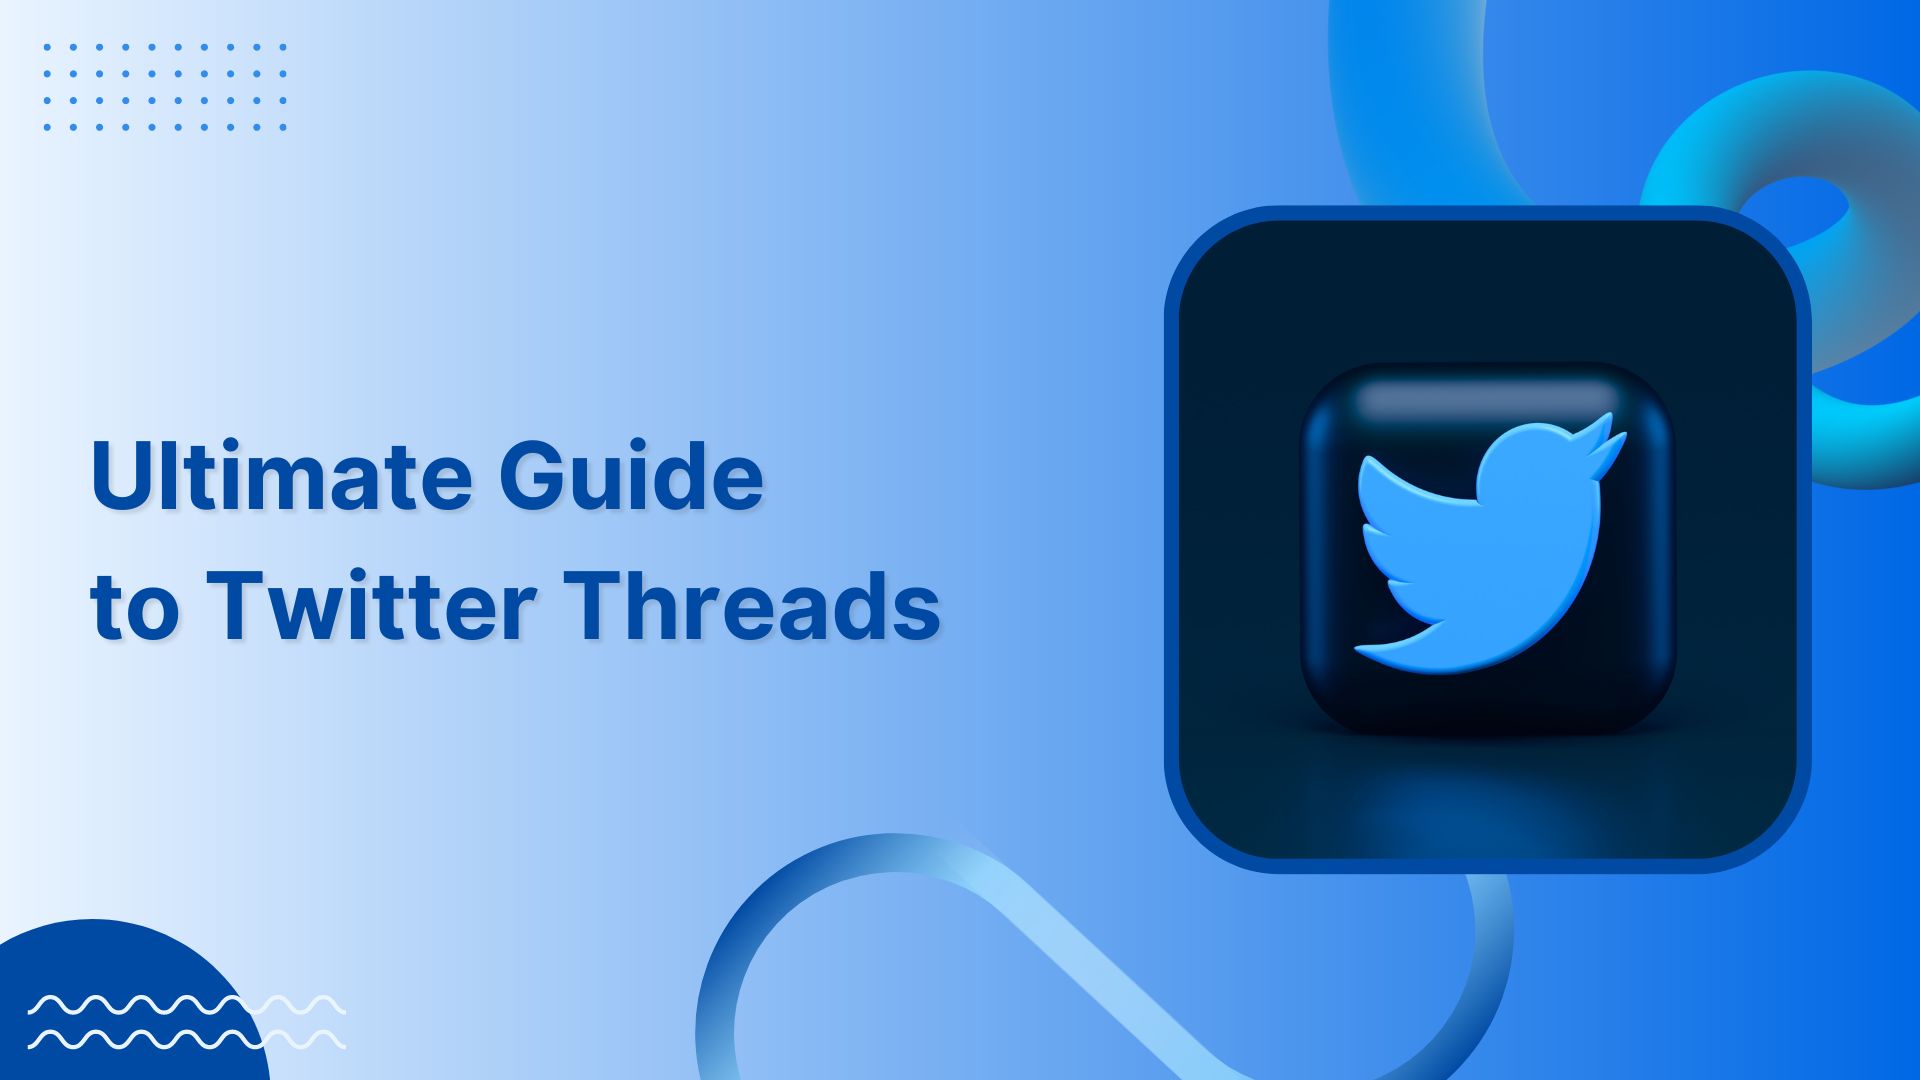 An Ultimate Guide to Twitter Threads